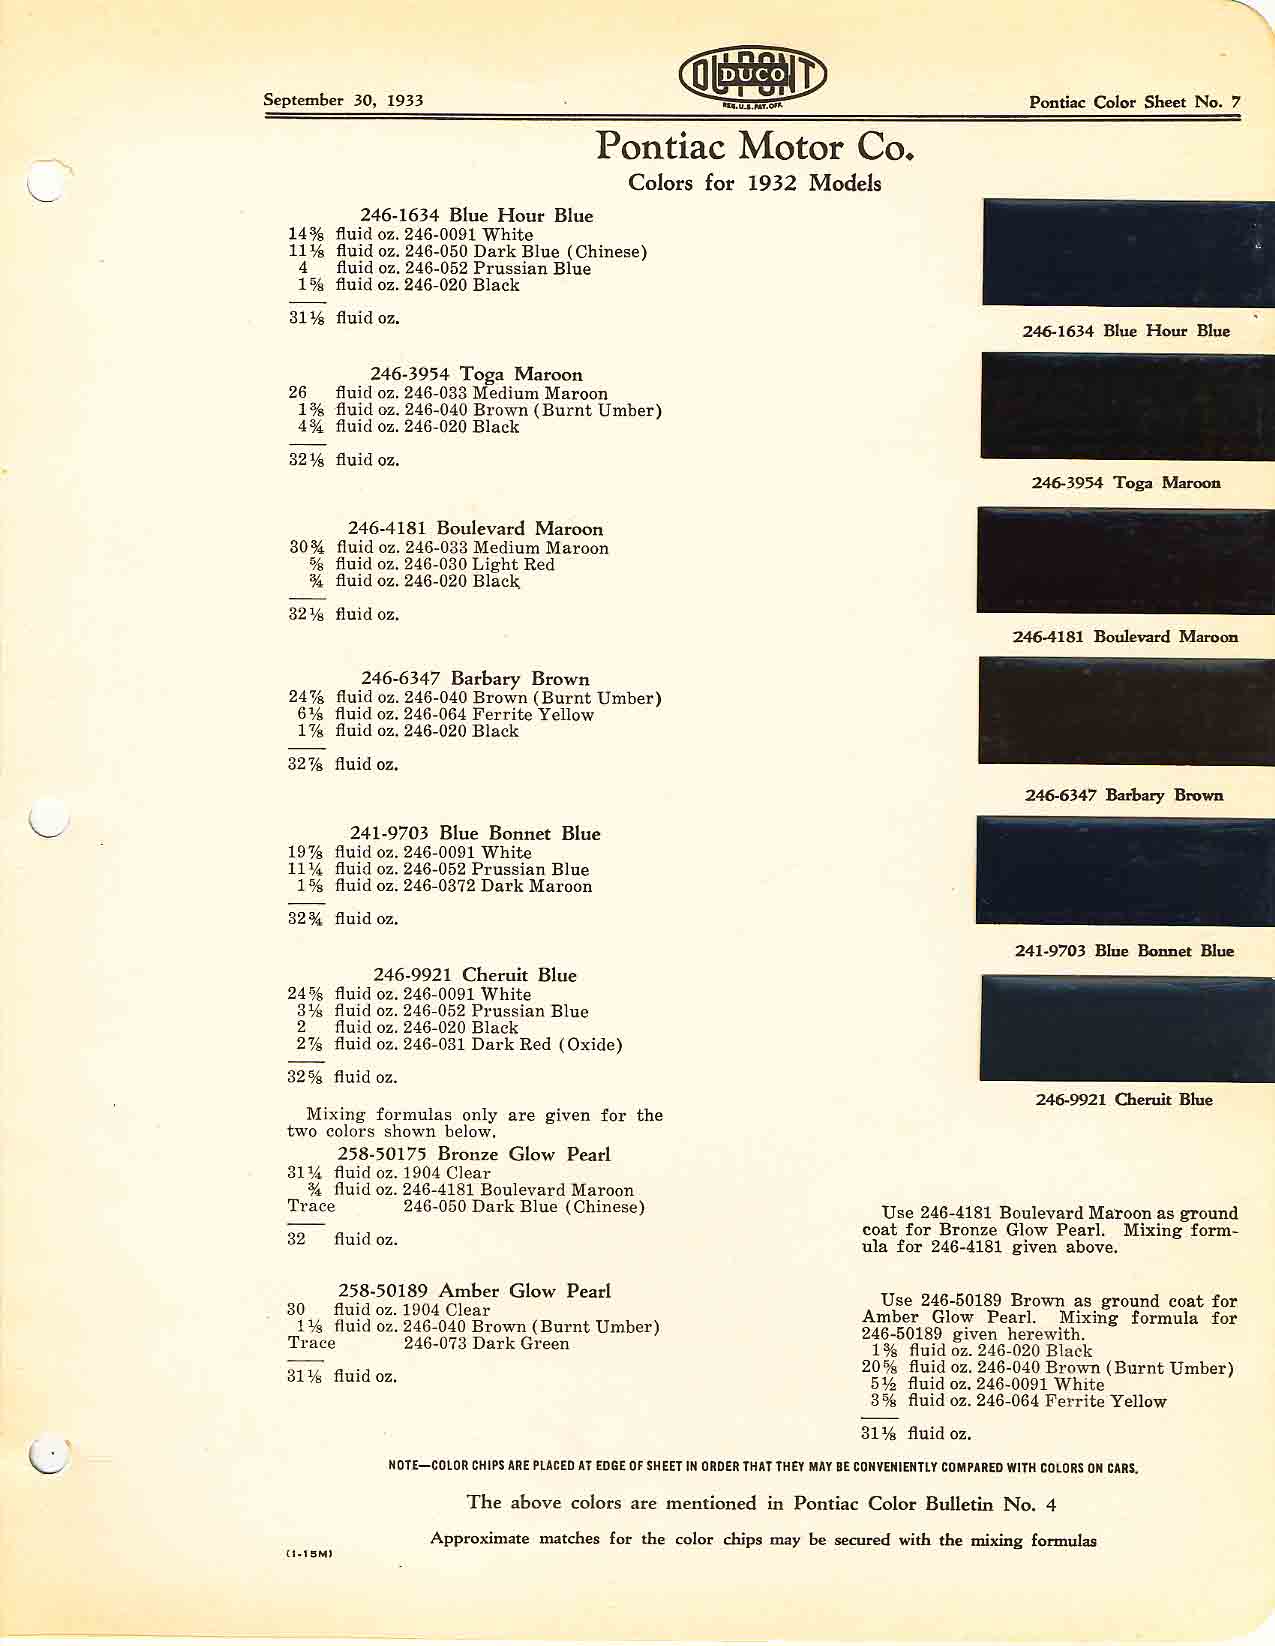 Colors and codes used on Pontiac Vehicles in 1932